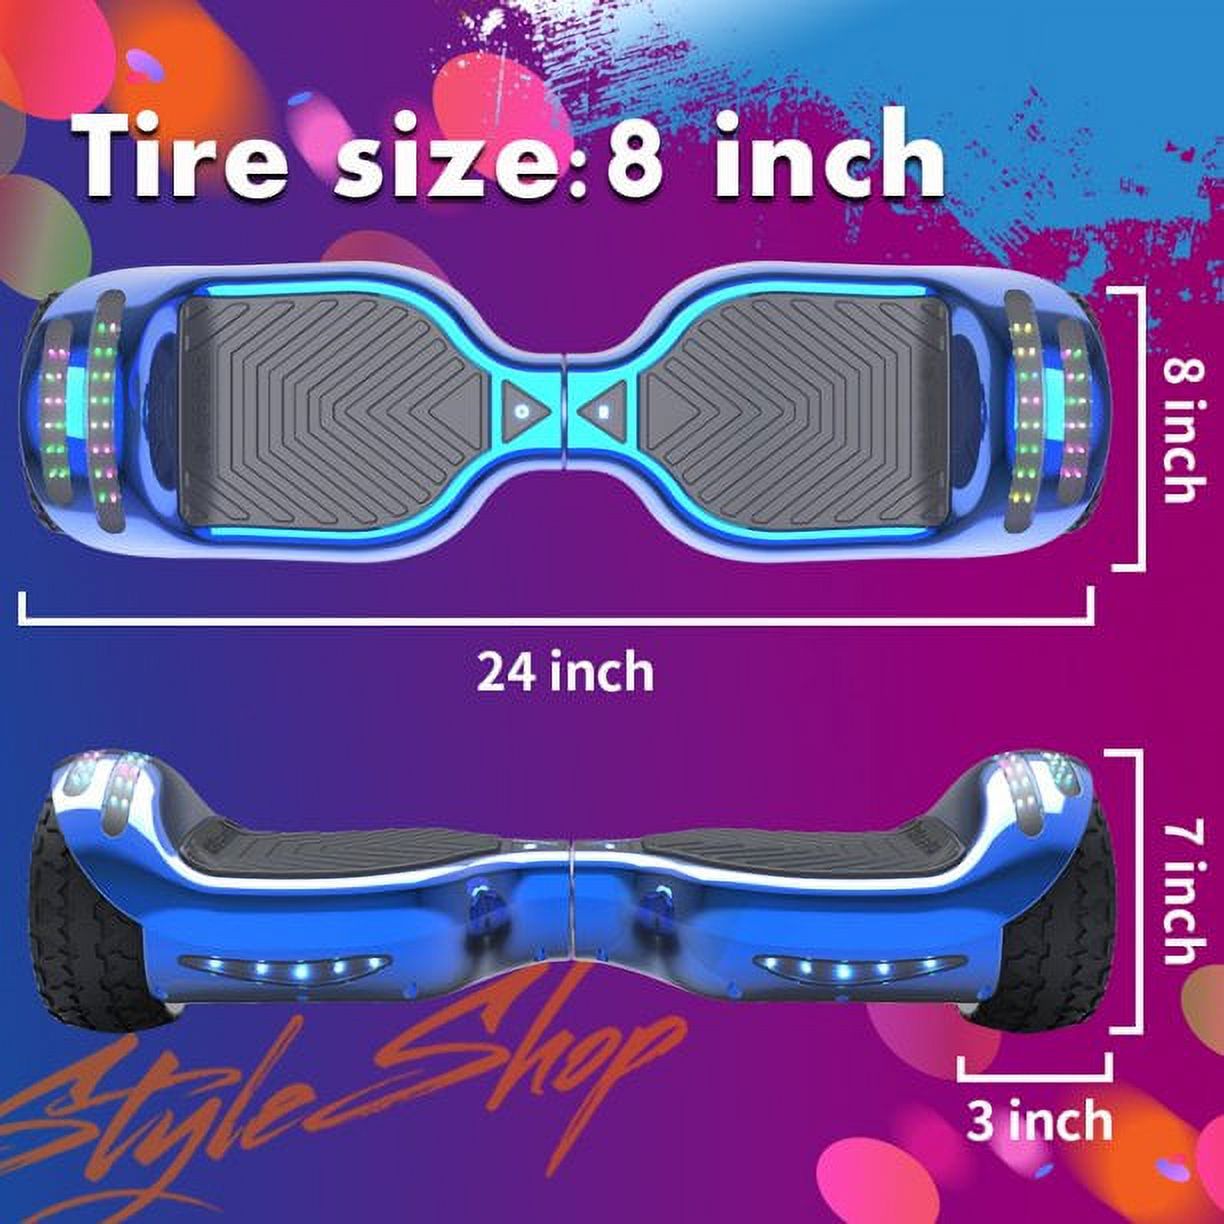 Hoverboard All-Terrain LED Flash Wide All Terrian Wheel with Bluetooth Speaker Dual LED Light Self Balancing Wheel Electric Scooter Chrome Blue - image 4 of 5